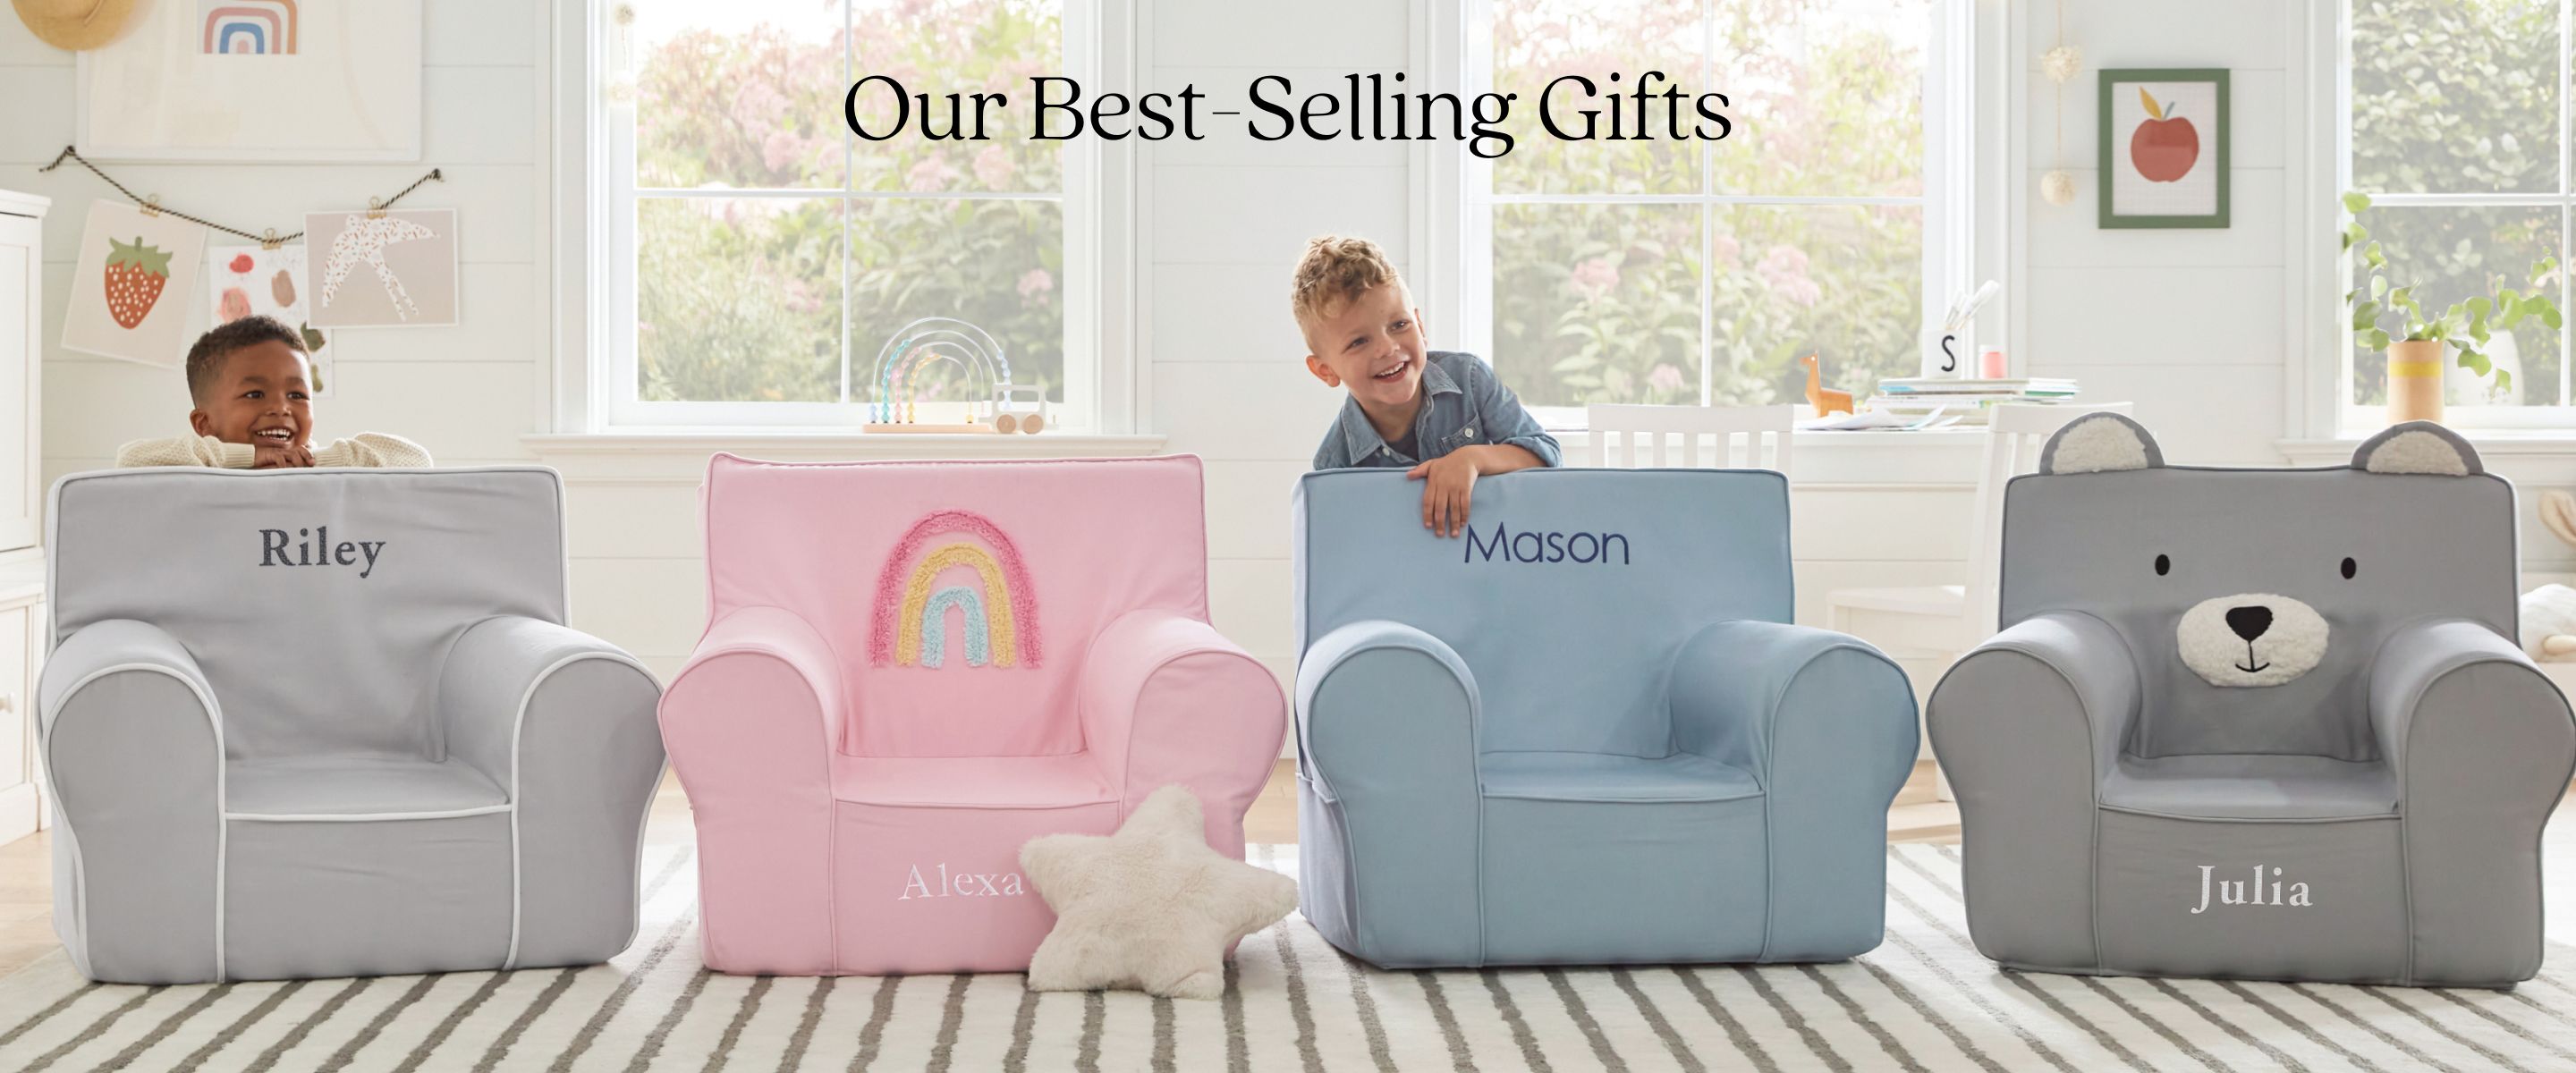 Our Best-Selling Gifts